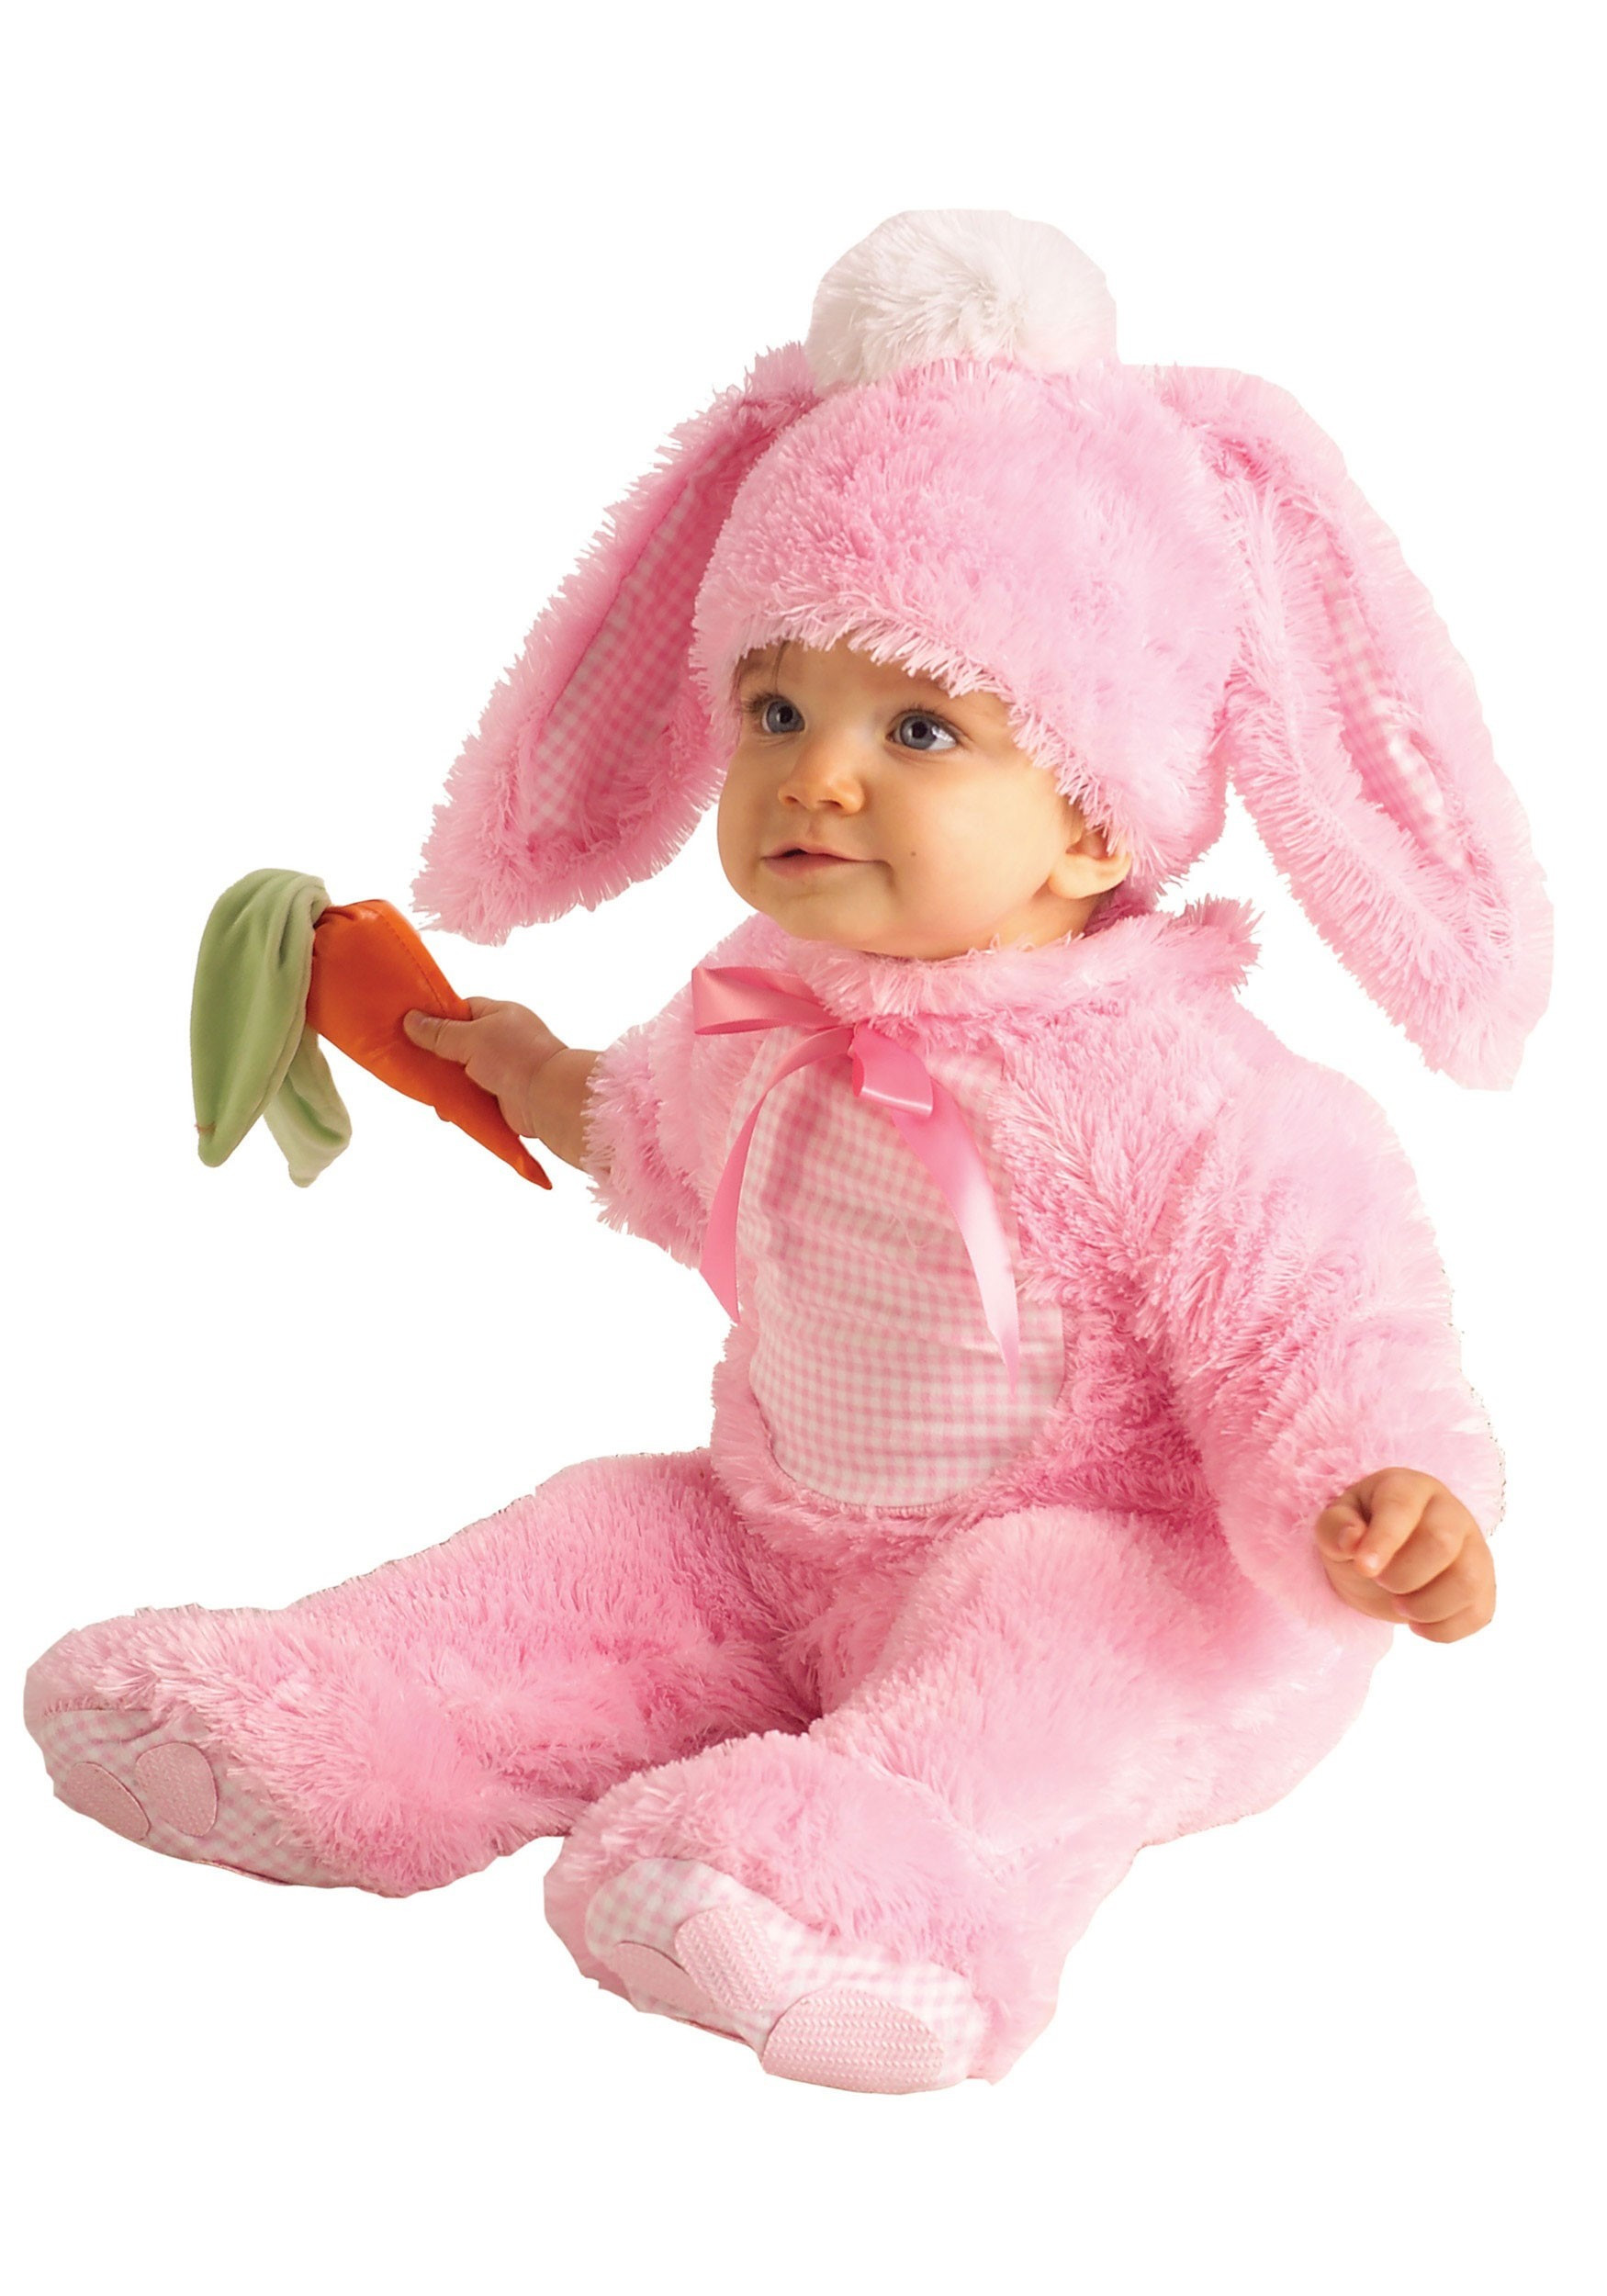 Easter Costume Ideas
 Baby Pink Bunny Costume Infant and Newborn Easter Bunny